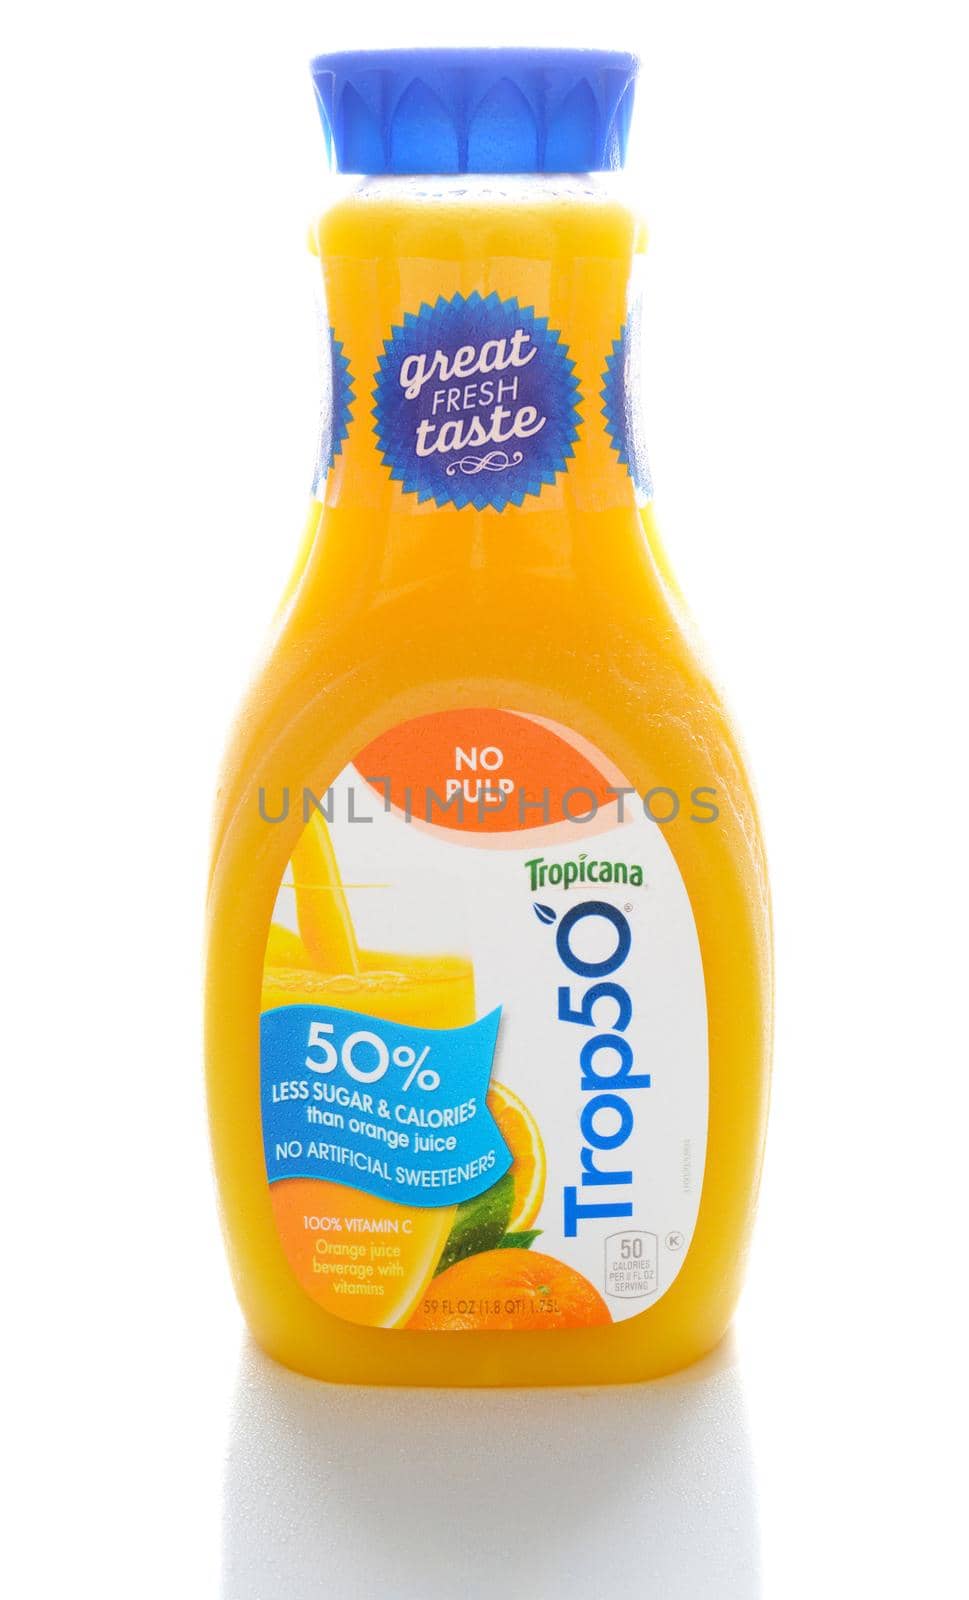 IRVINE, CA - FEBRUARY 7, 2015: A bottle of Trop50. From Tropicana Products, Trop50 is a reduced calorie orange juice with no added sugars and added vitamins.